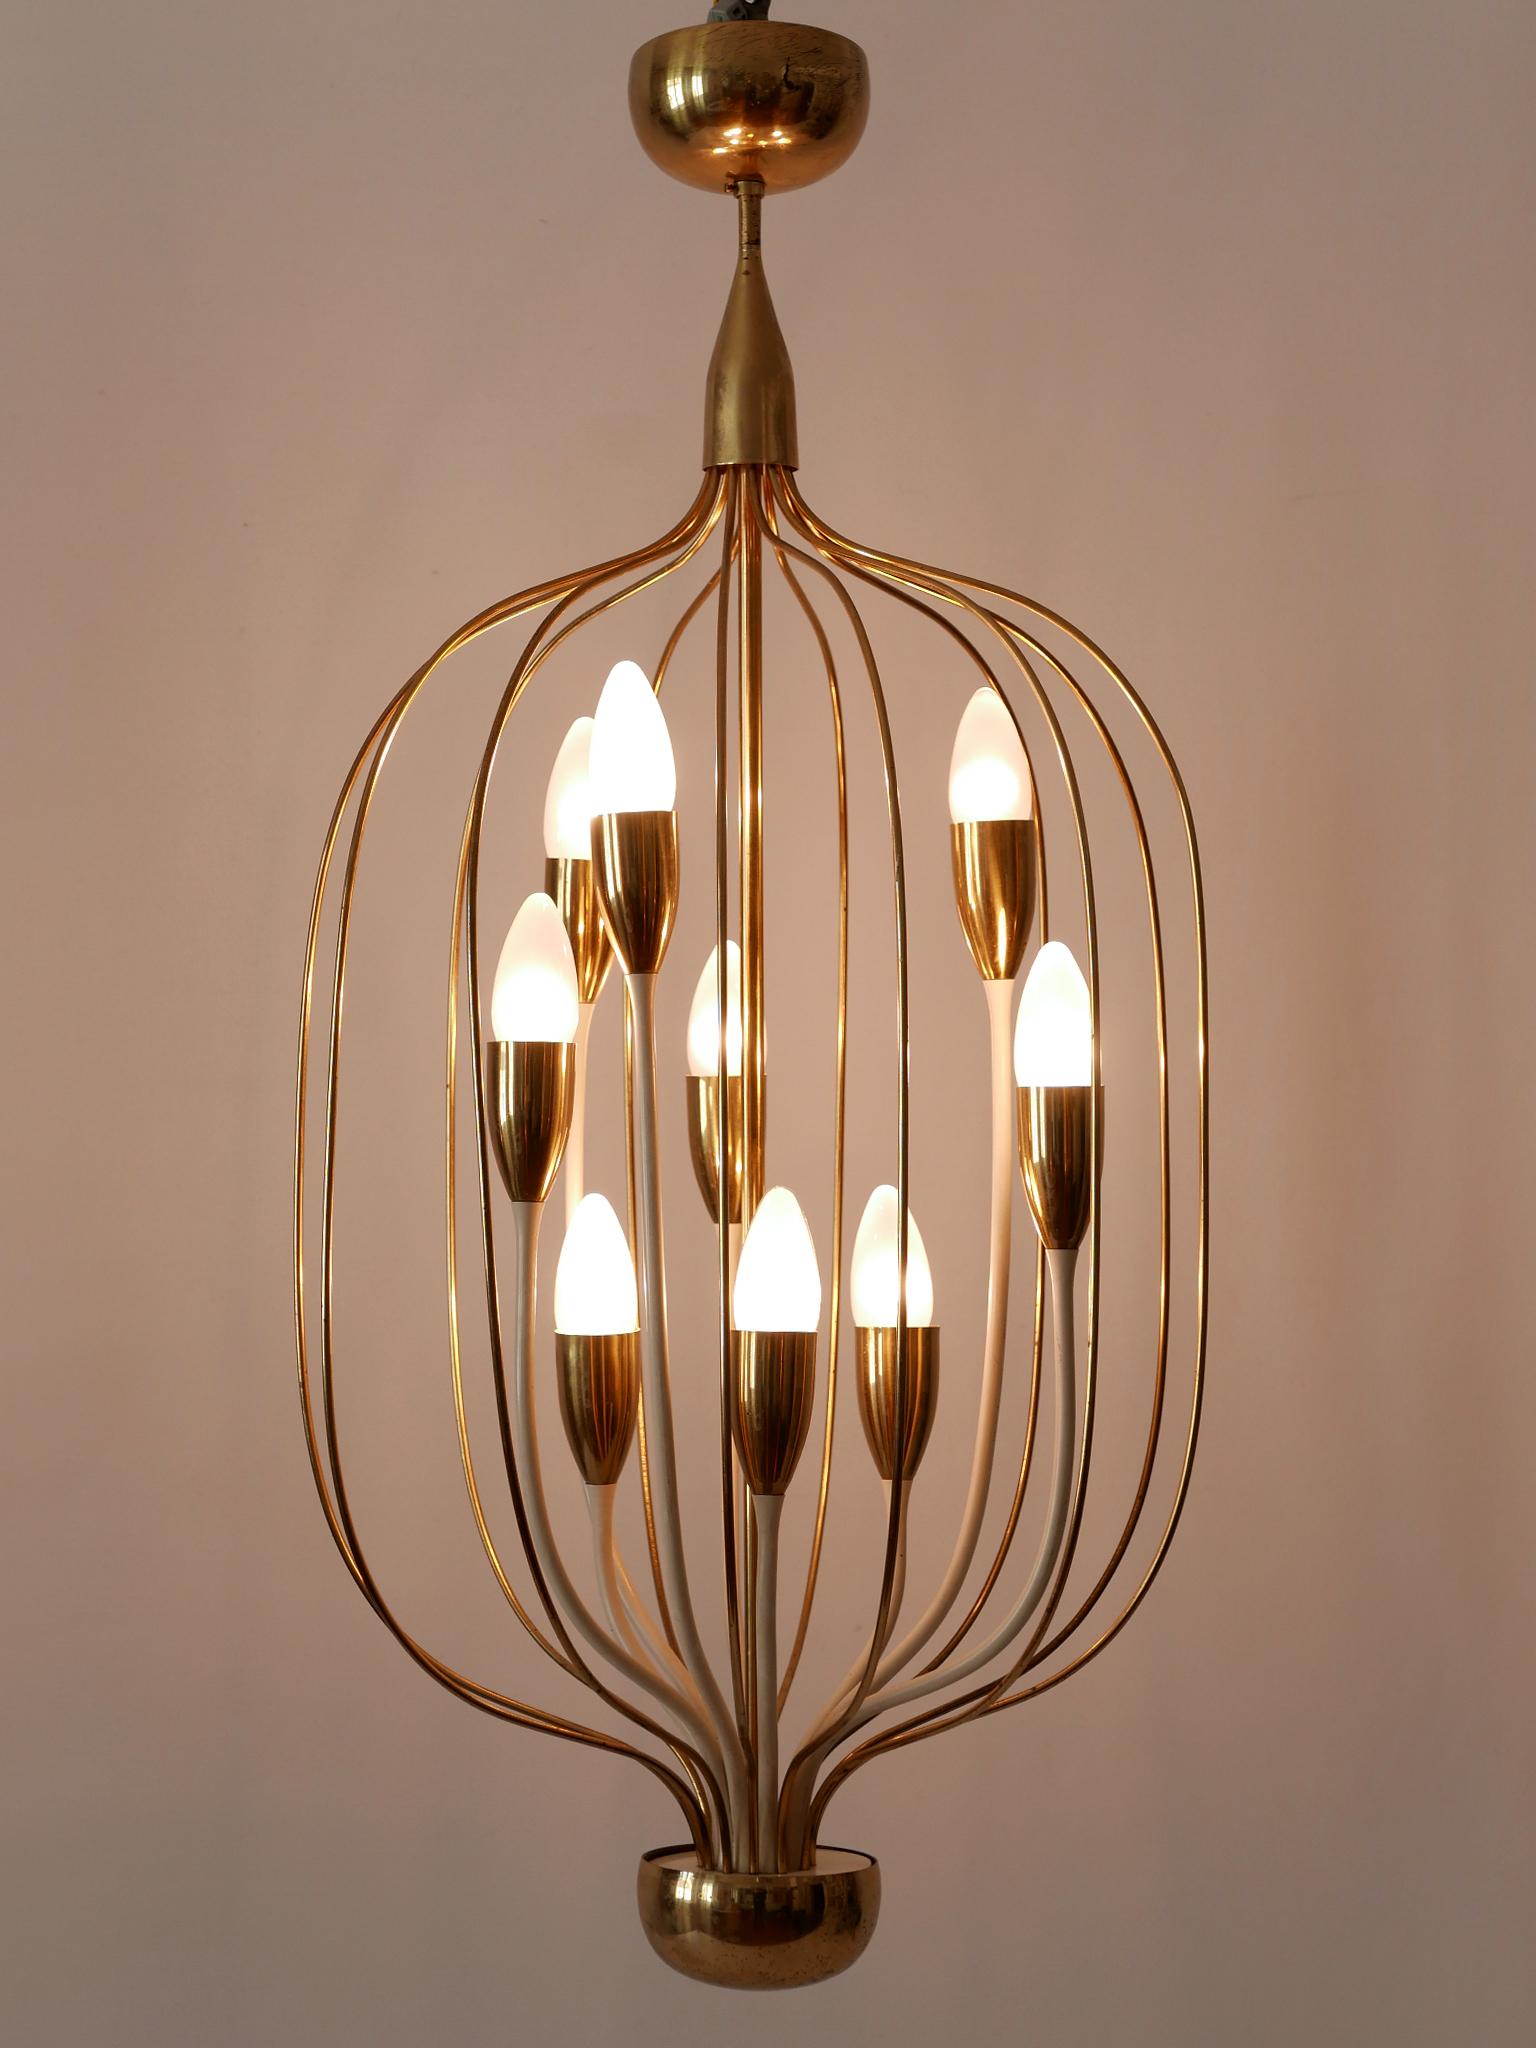 Exceptional Mid-Century Modern Nine-Flamed Chandelier or Pendant Lamp 1950s For Sale 2